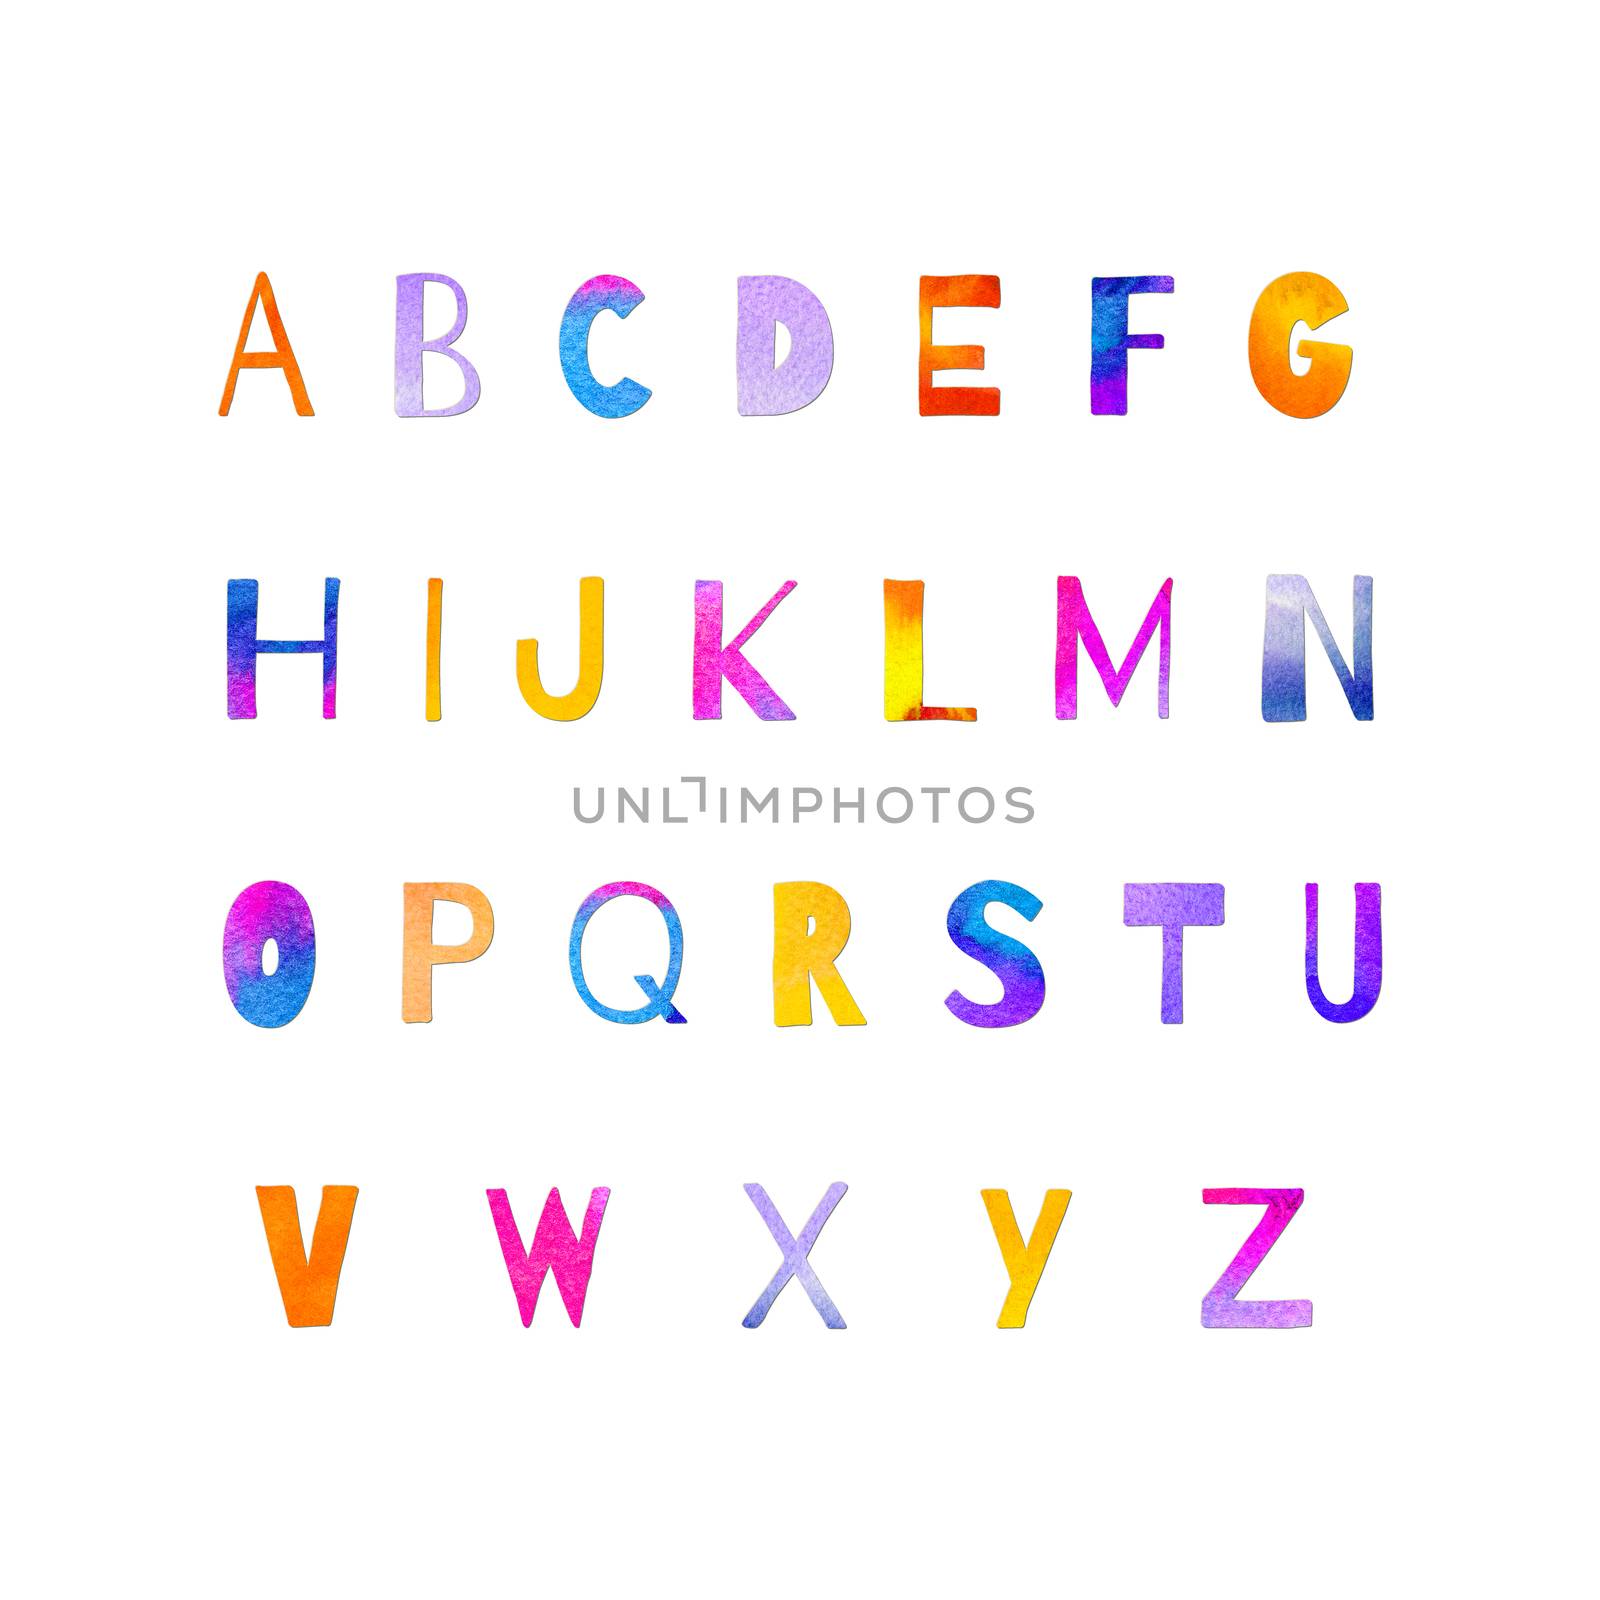 Hand painted watercolor alphabet letters in violet, blue, orange, yellow, pink colors. Collage of paper-cut abc elements isolated on white. Artistic lettering set perfect for print, poster.